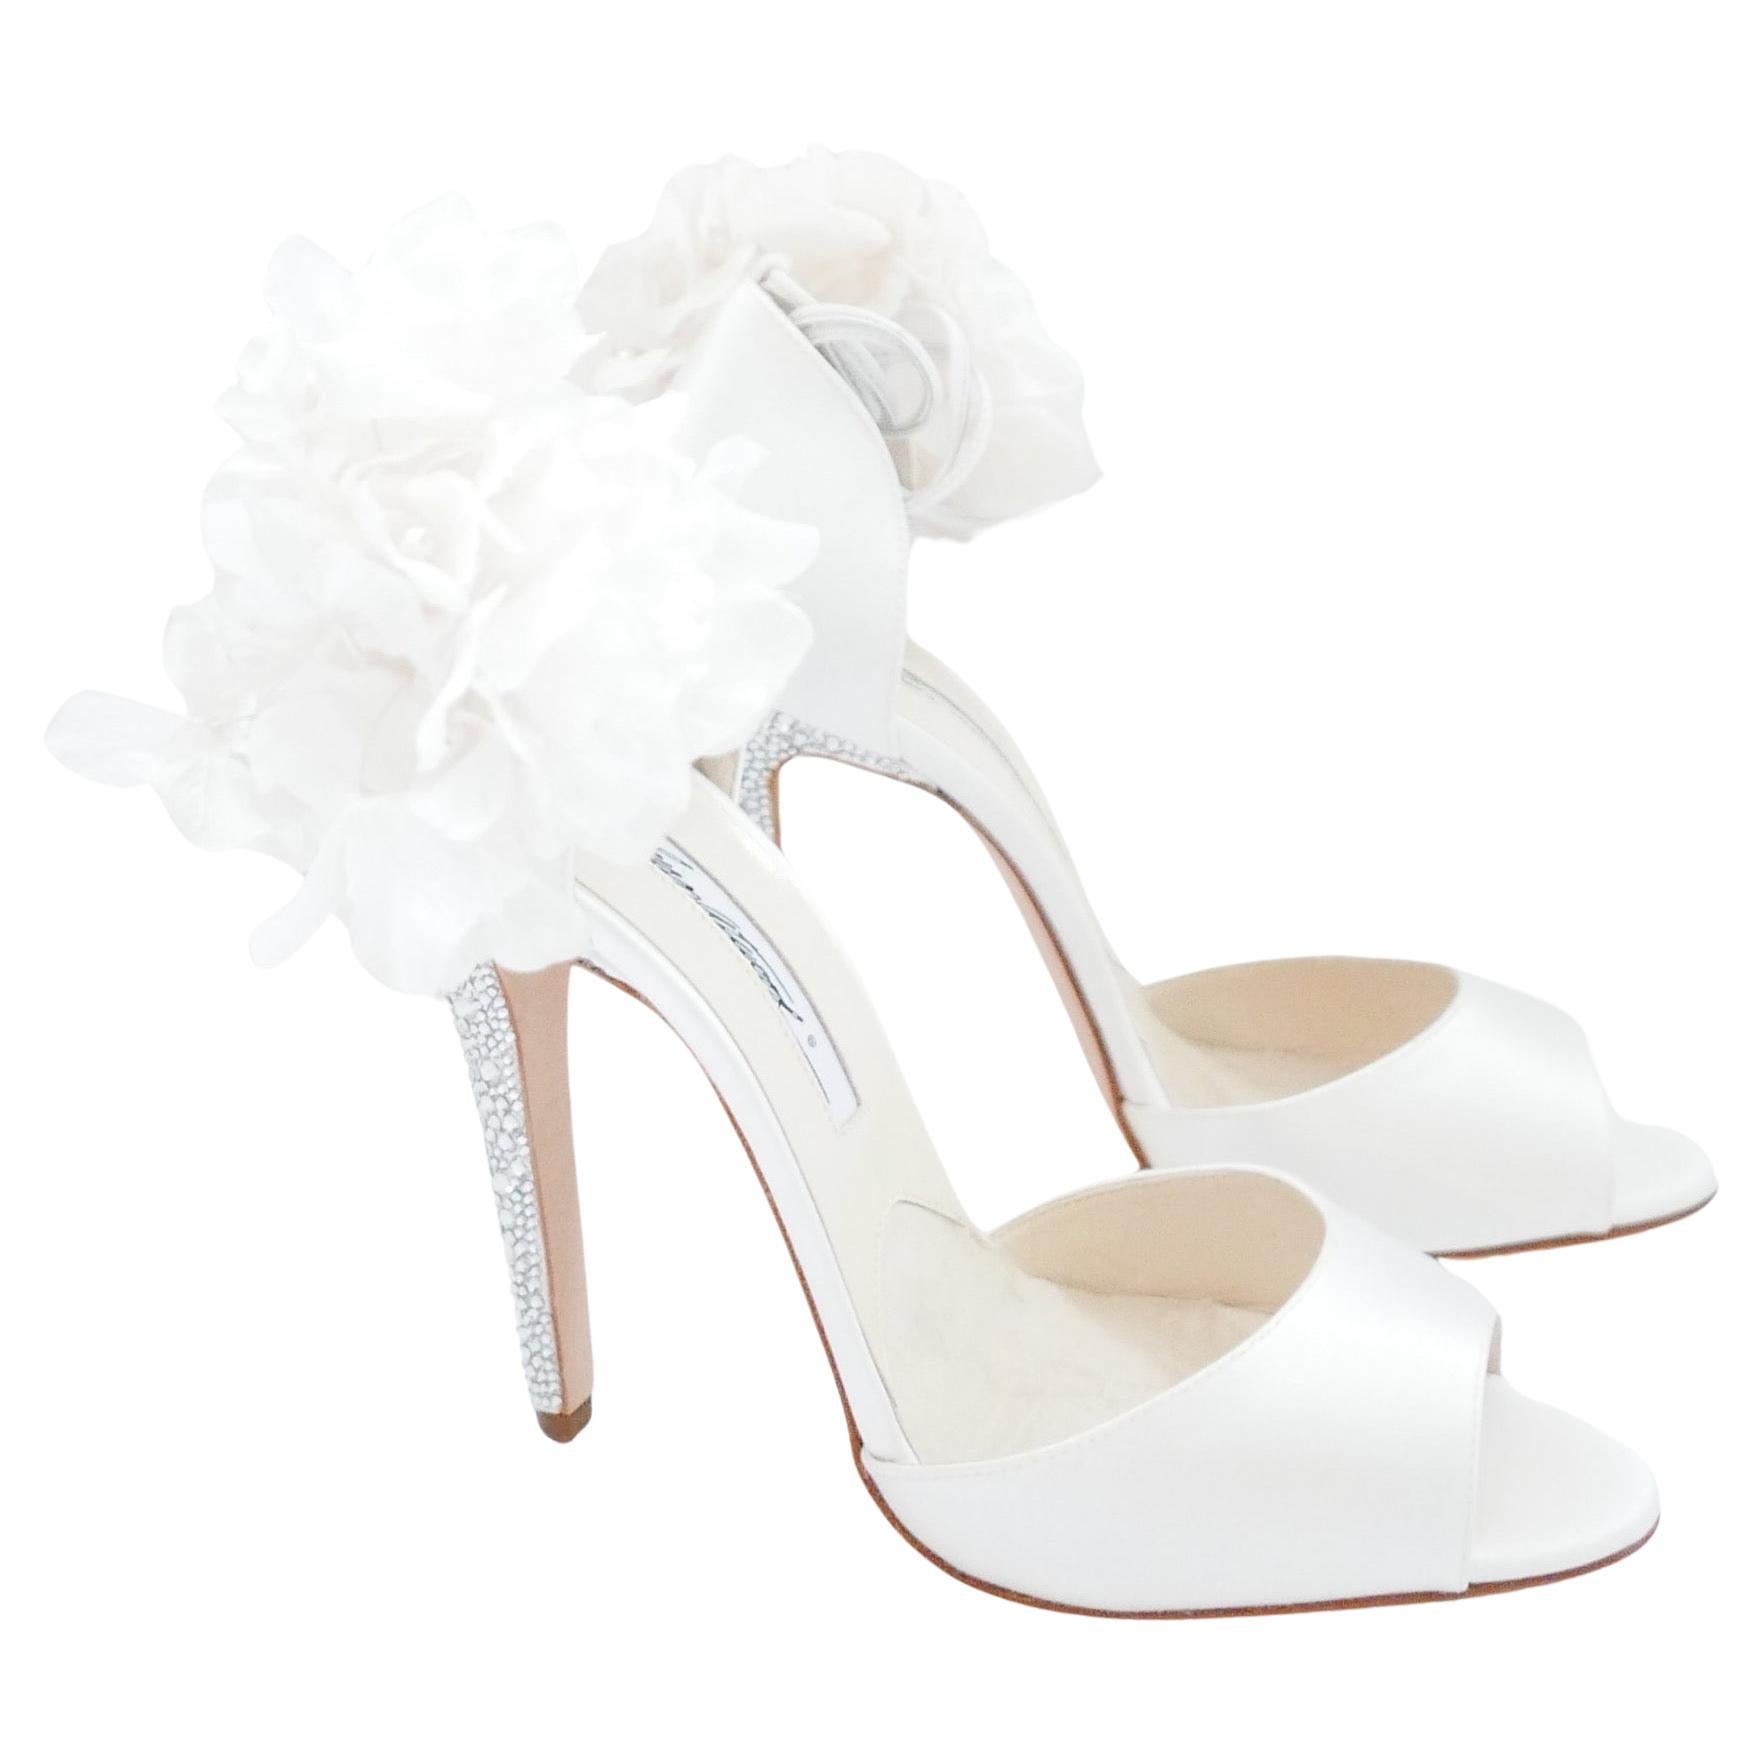 Brian Atwood Corsage Trim Crystal Heel Bridal Shoes For Sale